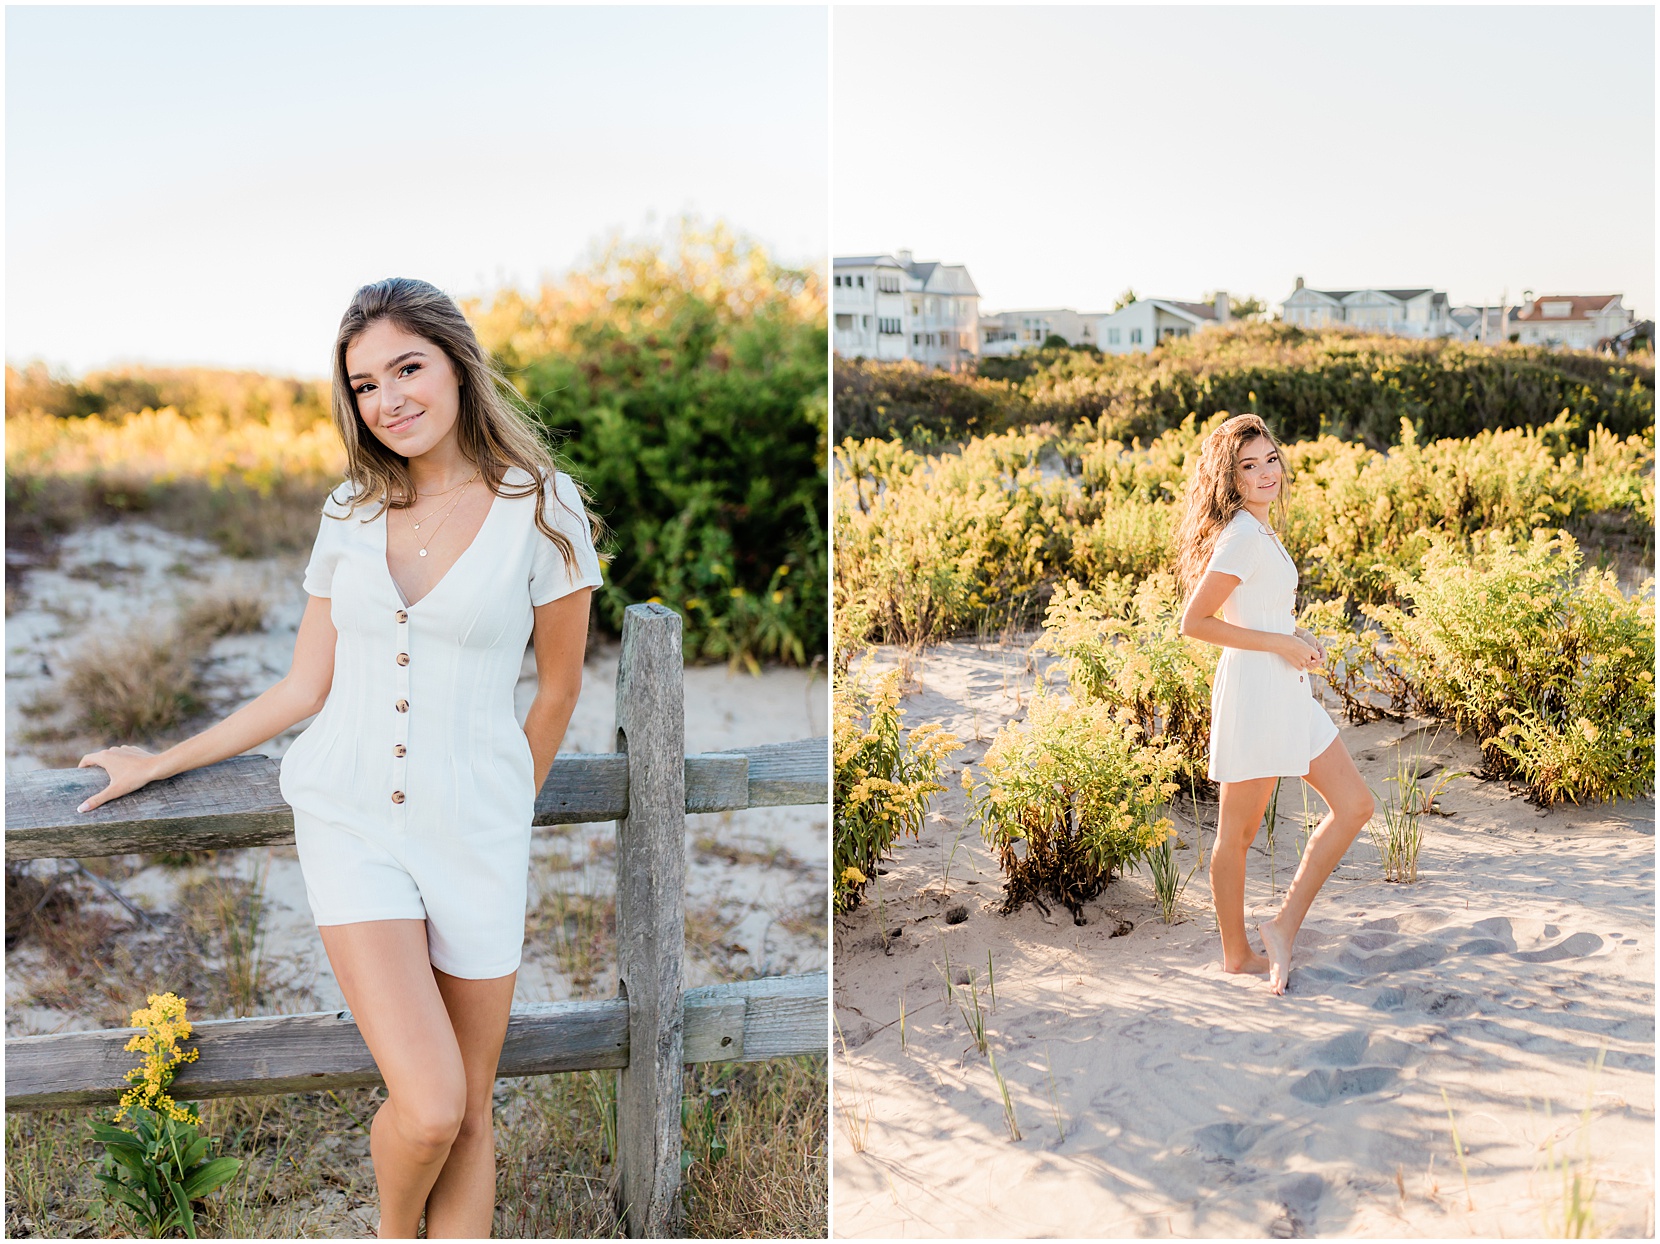 high school senior posing for senior pictures on the beach in ocean city new jersey. she is wearing a white romper